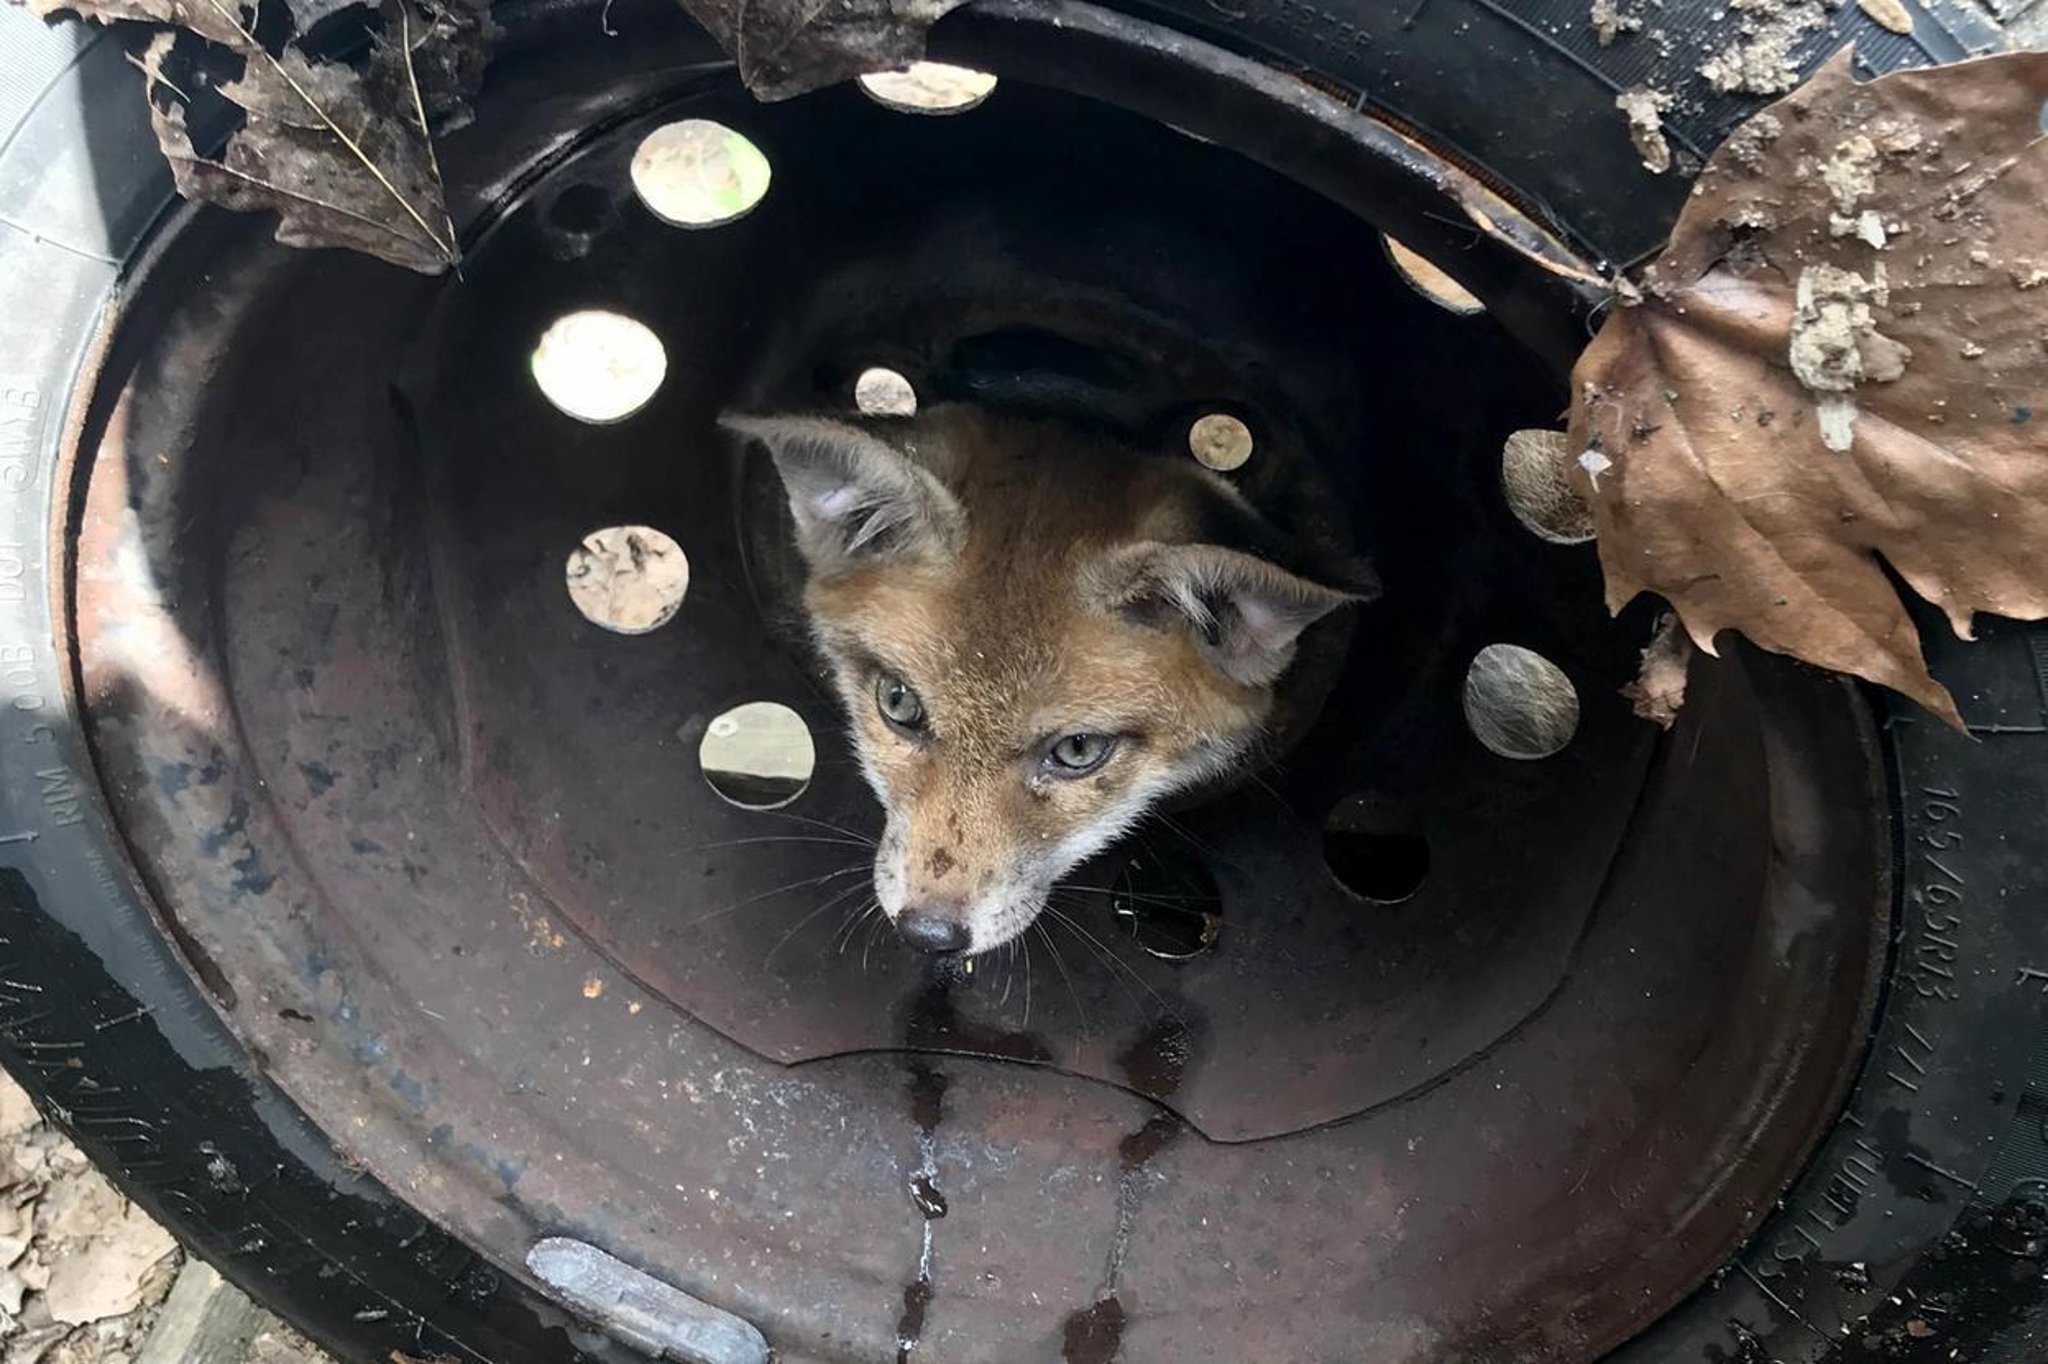 RSPCA warning after four fox cubs get stuck in old car wheels